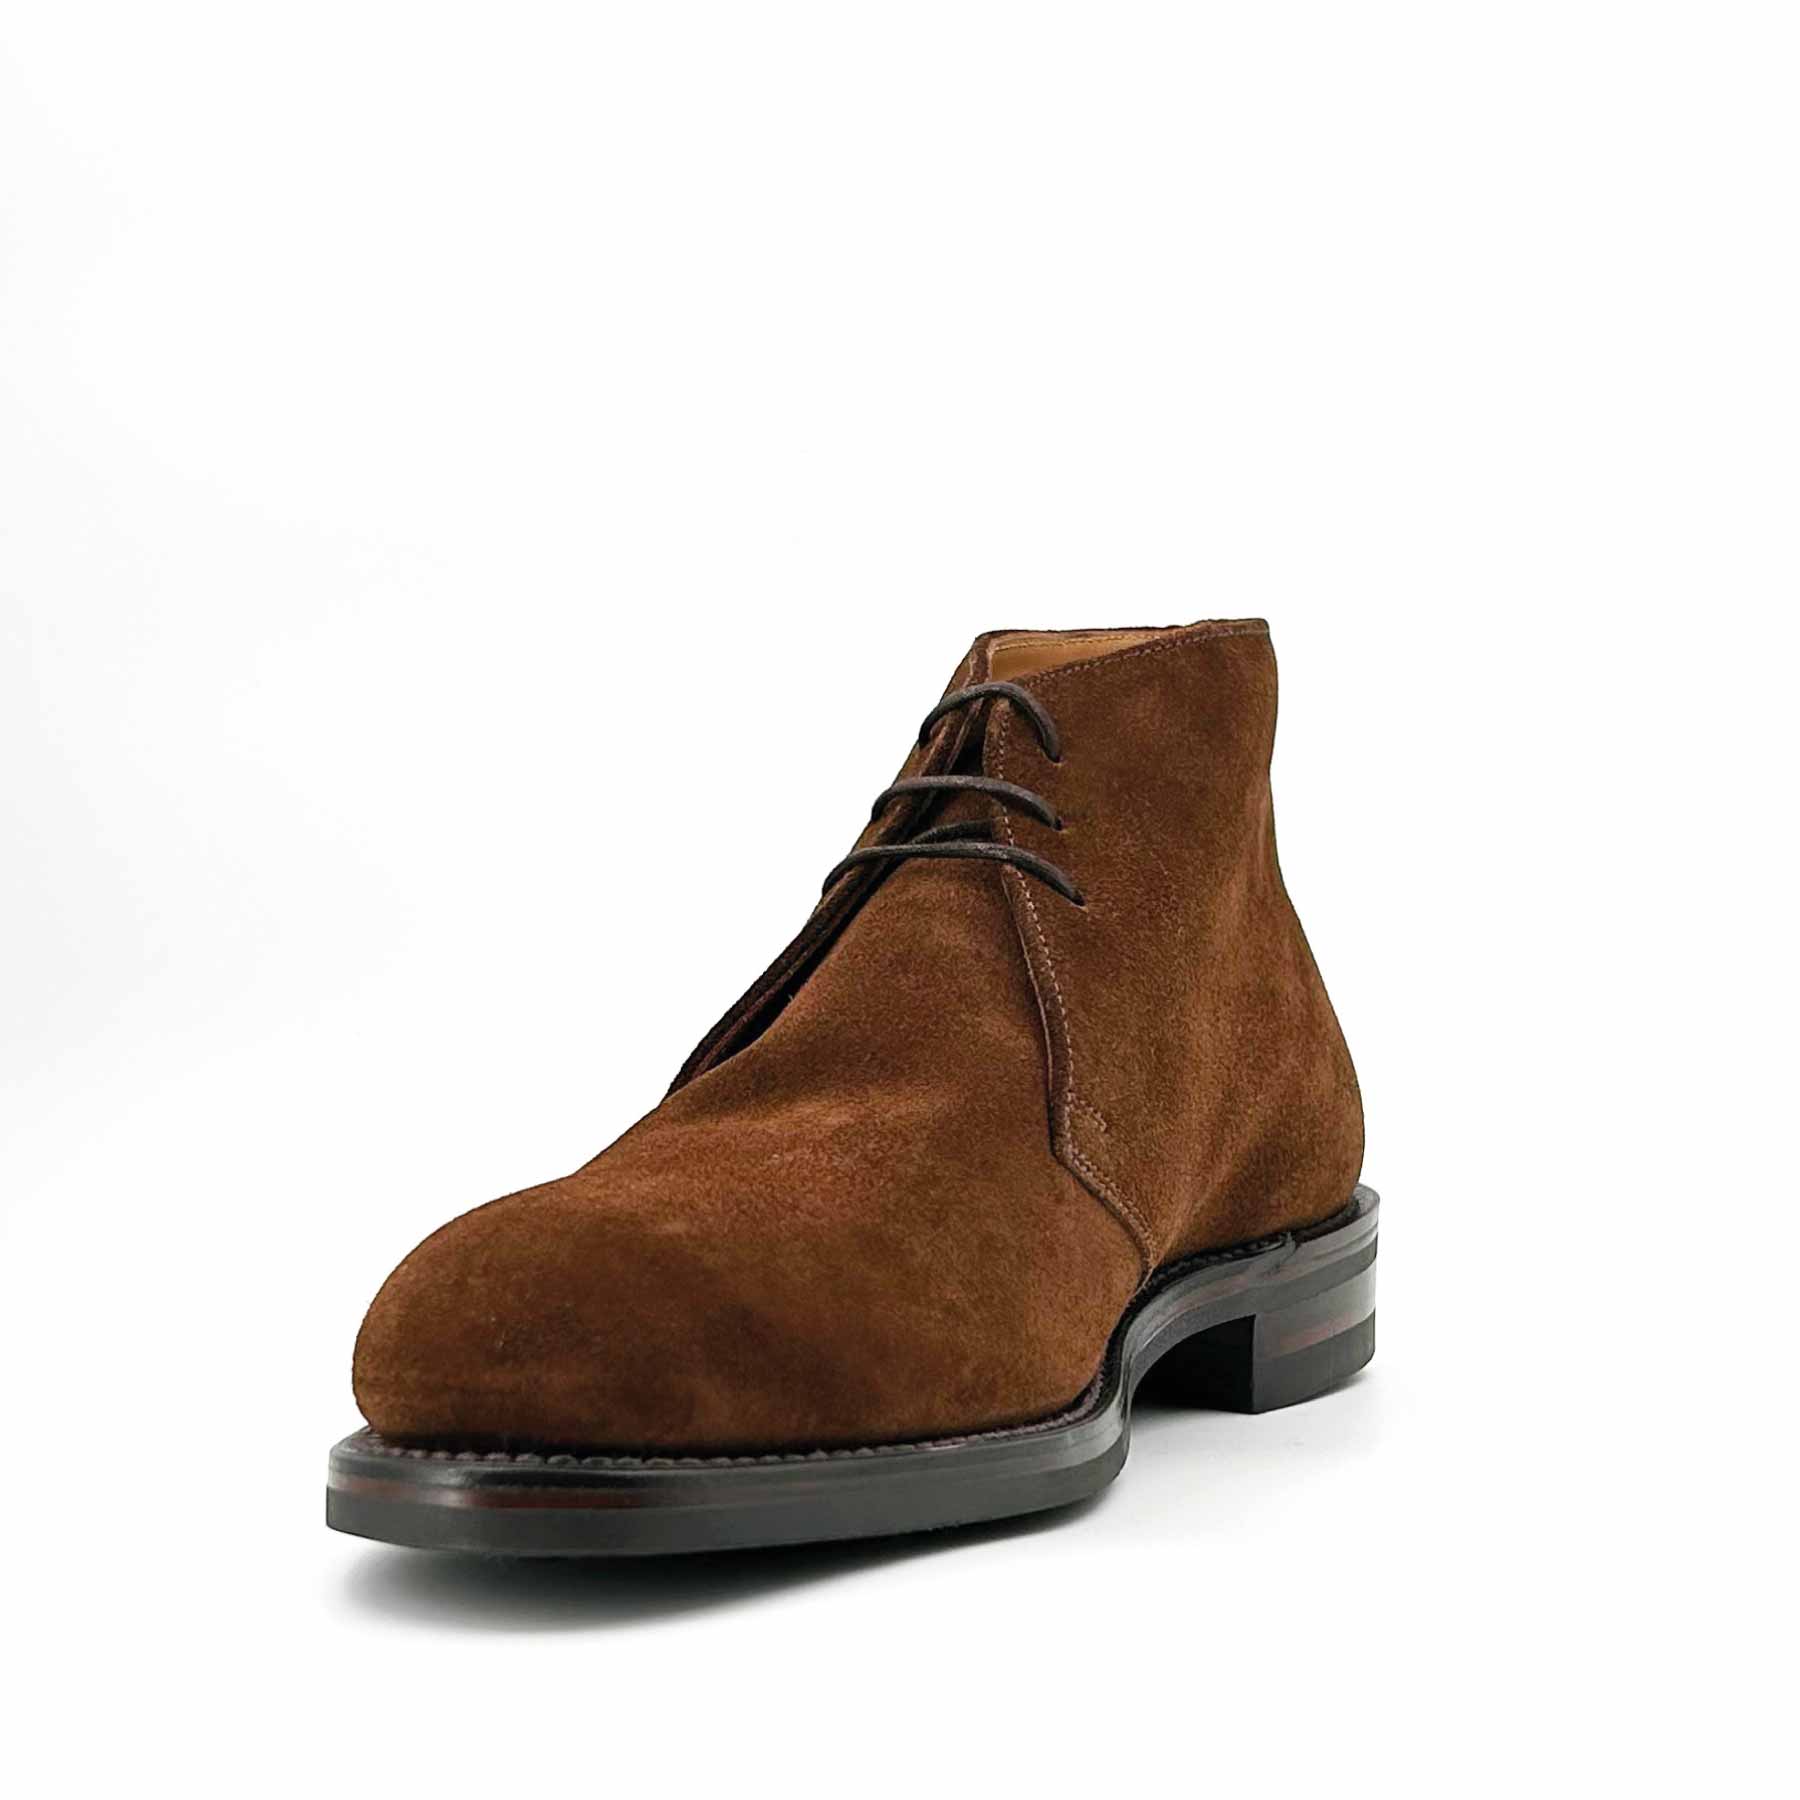 Pimlico Brown Suede Chukka Boot